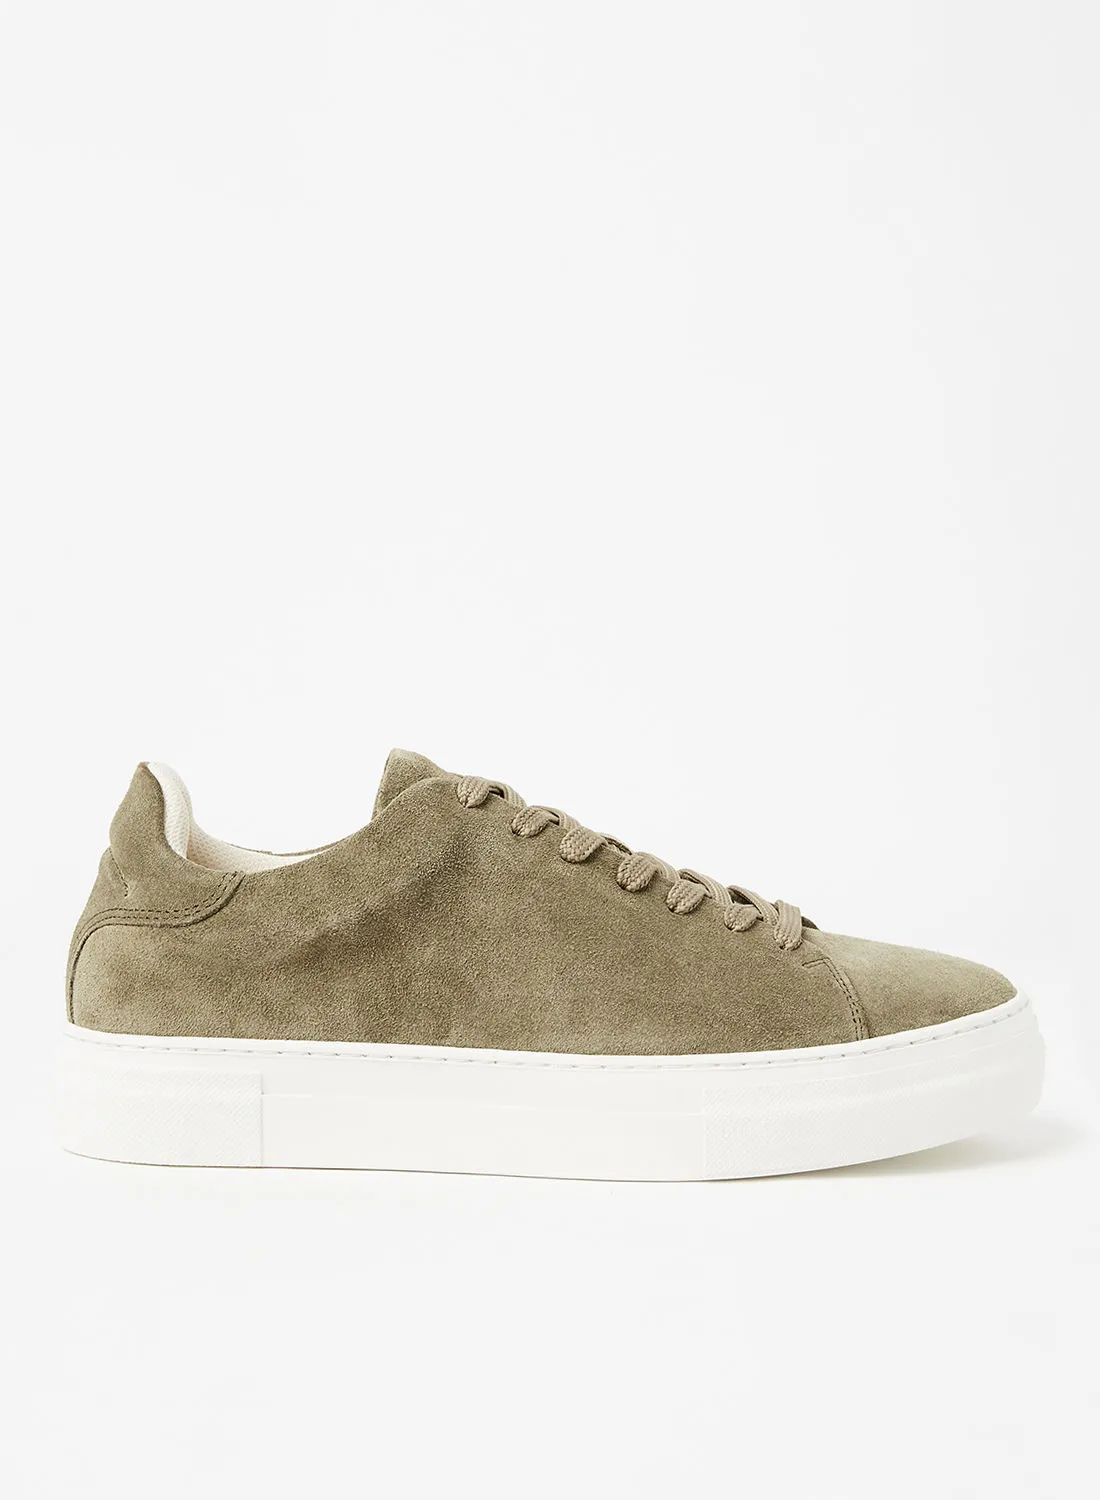 Selected Homme David Suede Sneakers Olive